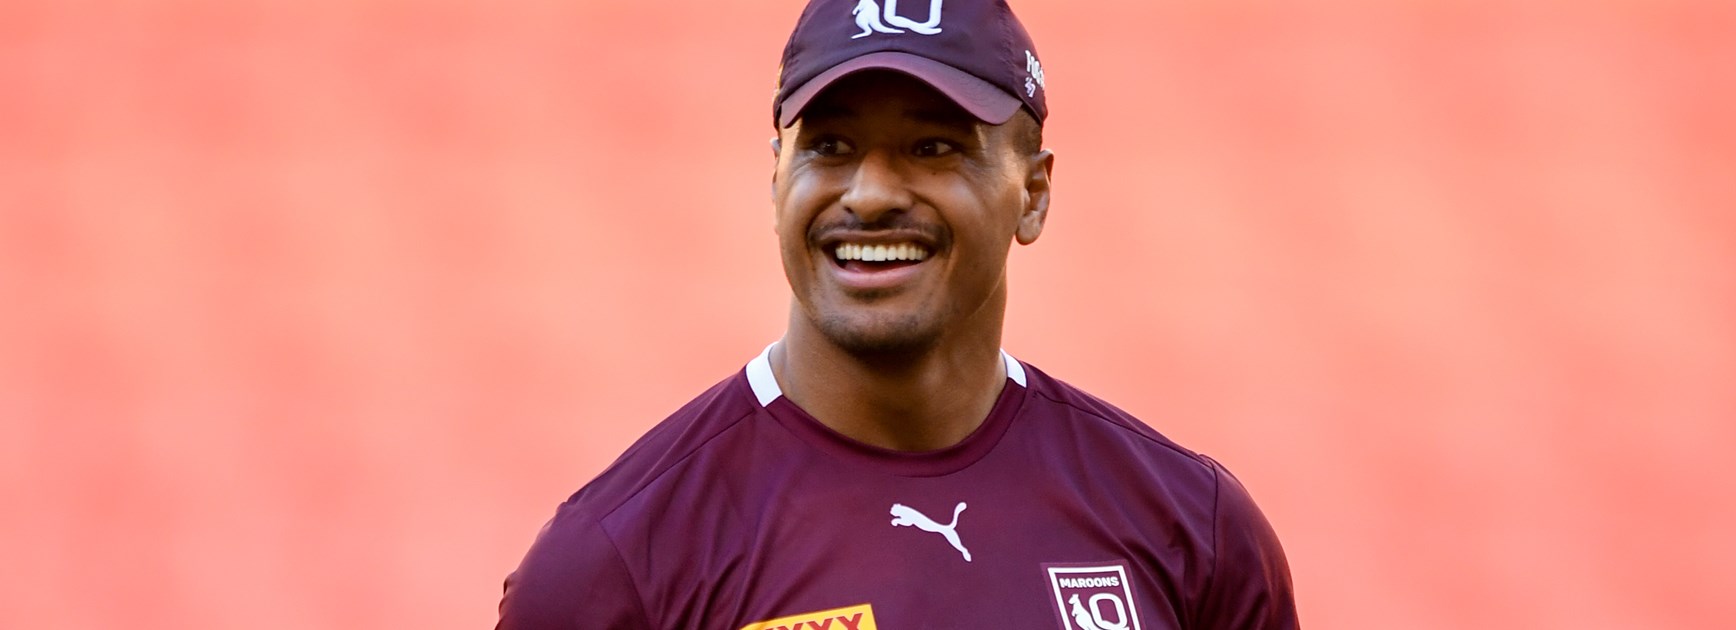 Not guilty: Kaufusi free to play Origin I, Leilua also cleared